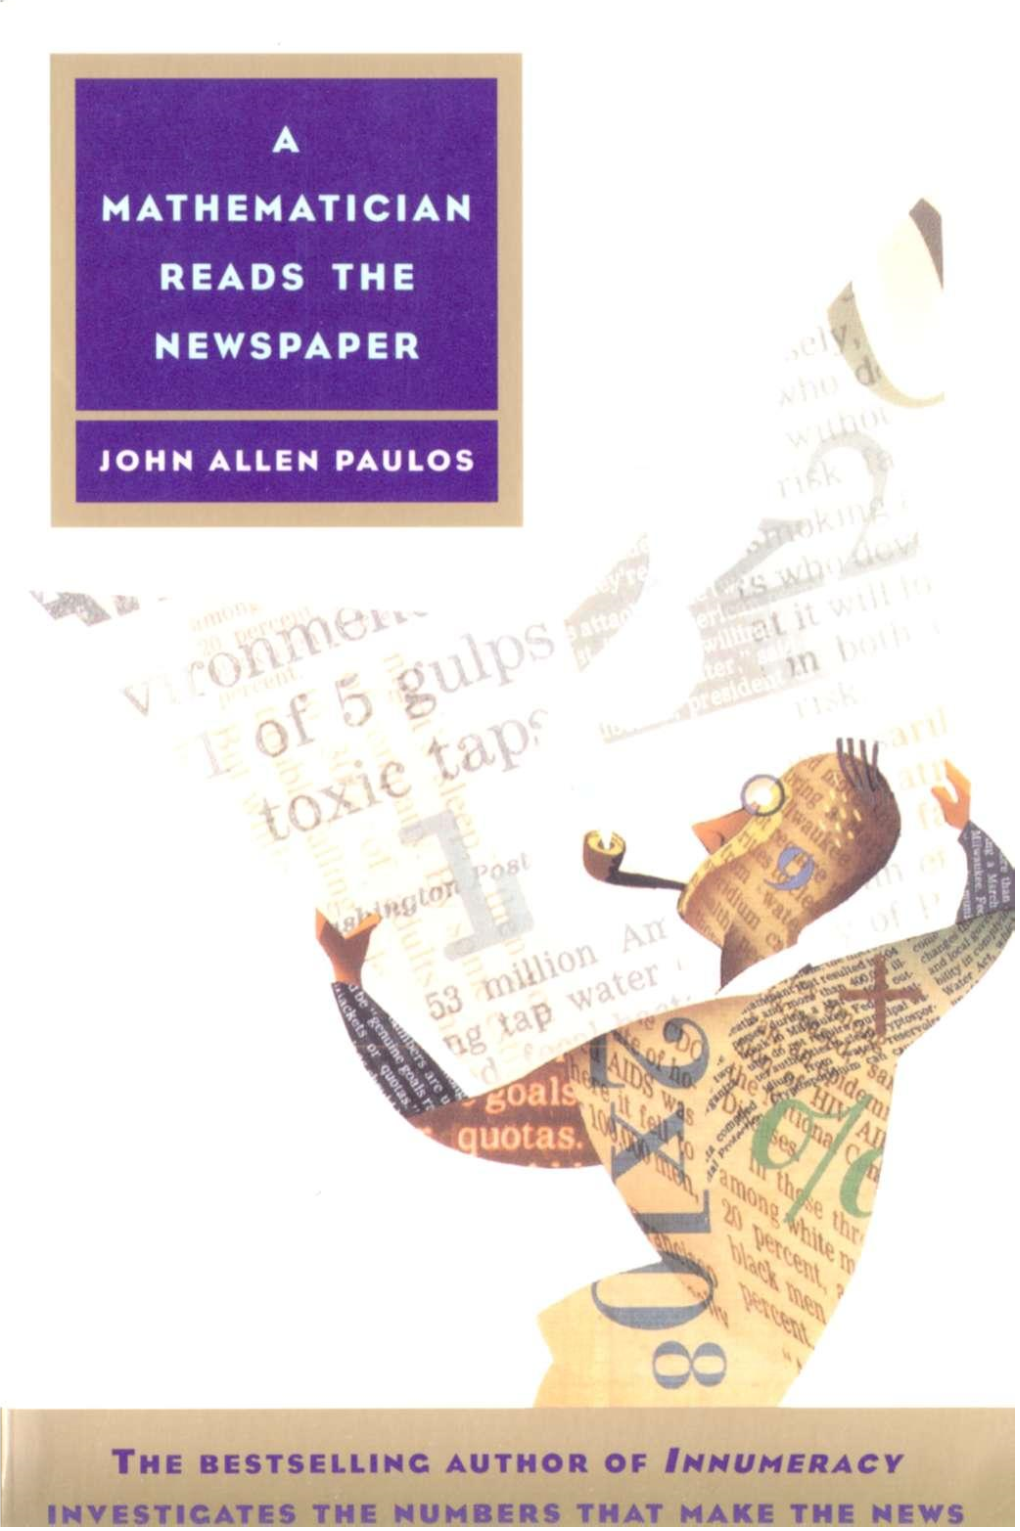 A Mathematician Reads the Newspaper (1997) by John